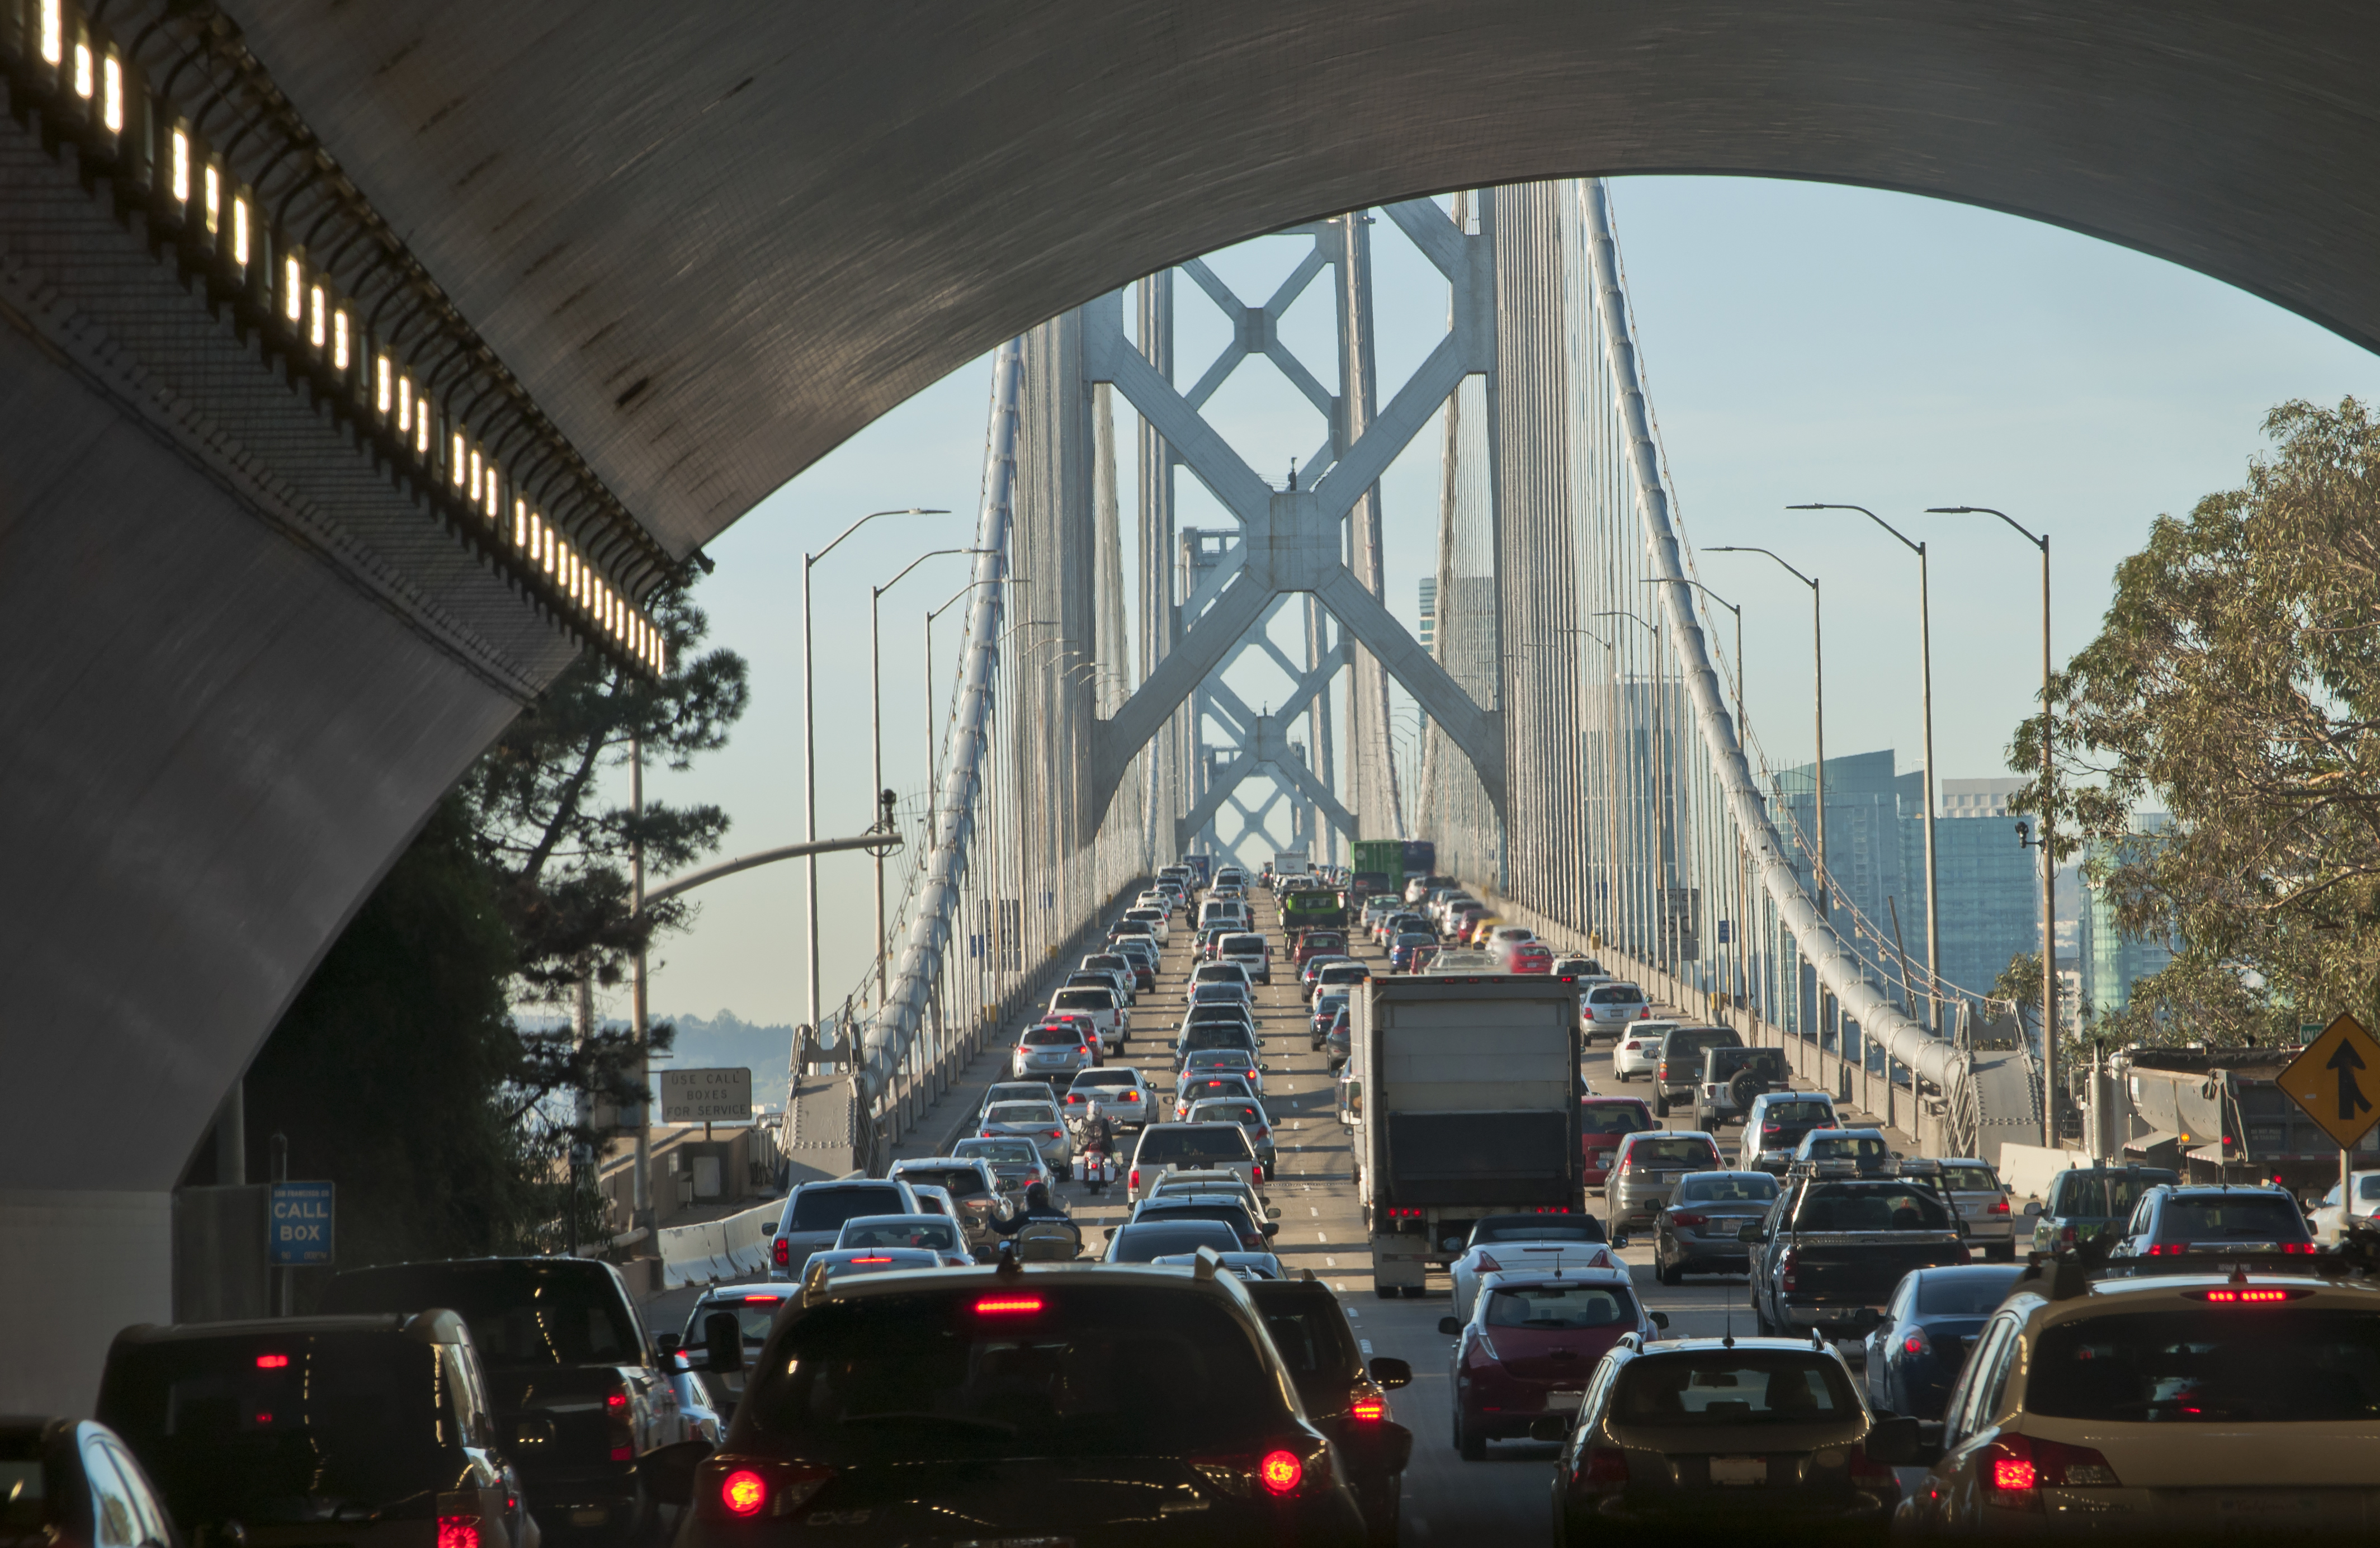 Massive traffic jam In the early morning on the Bay Bridge, at the exit of a tunnel. It is the main connection between the cities of Oakland and San Francisco.